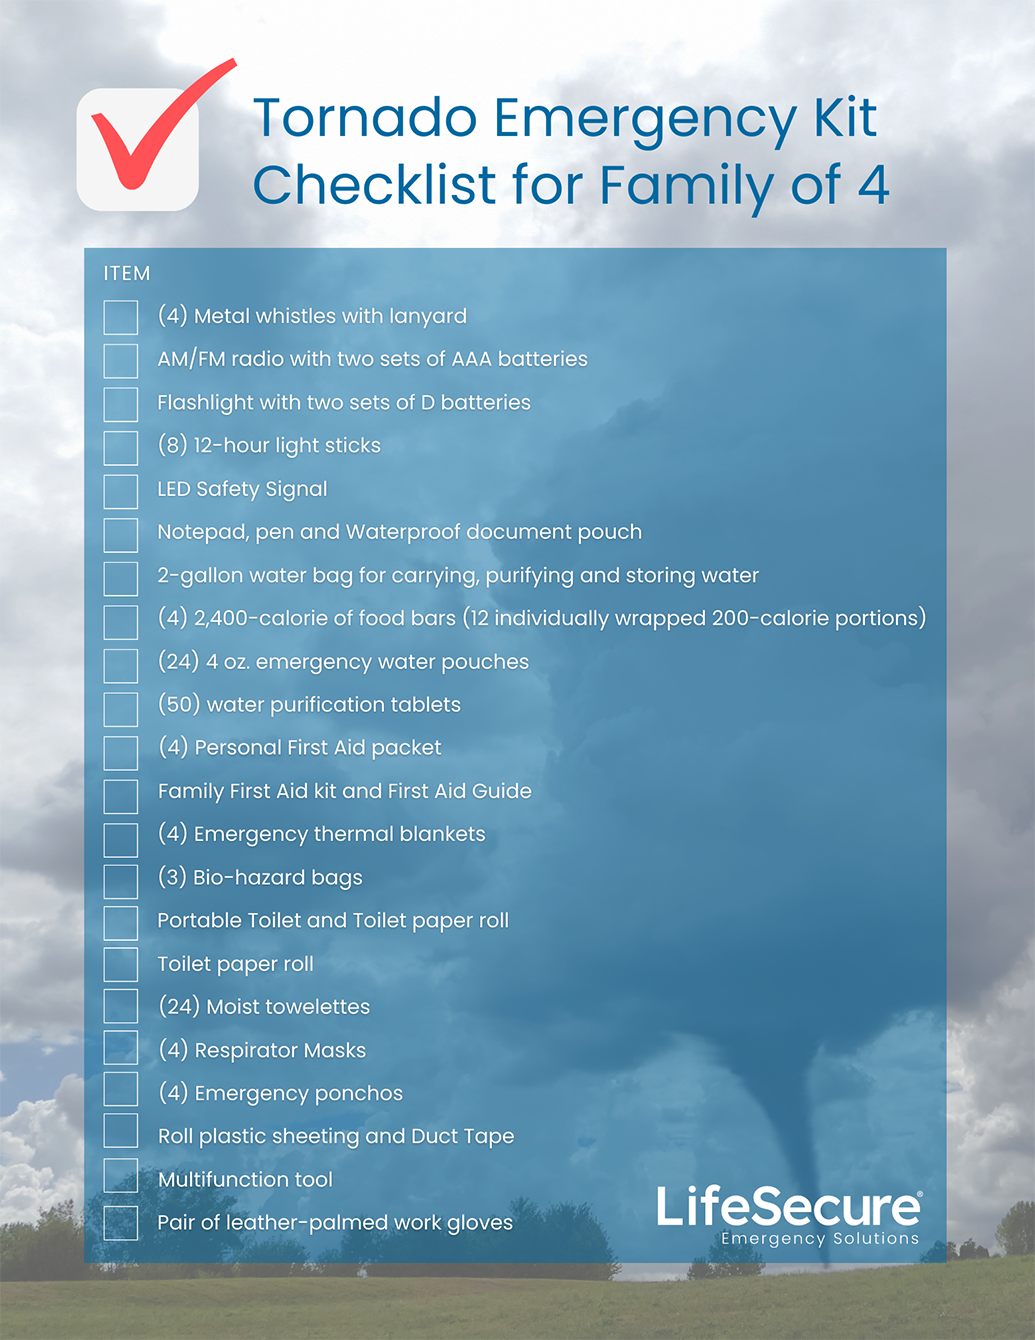 https://www.lifesecure.com/wp-content/uploads/2020/03/Office-Emergency-Supplies-Checklist.png